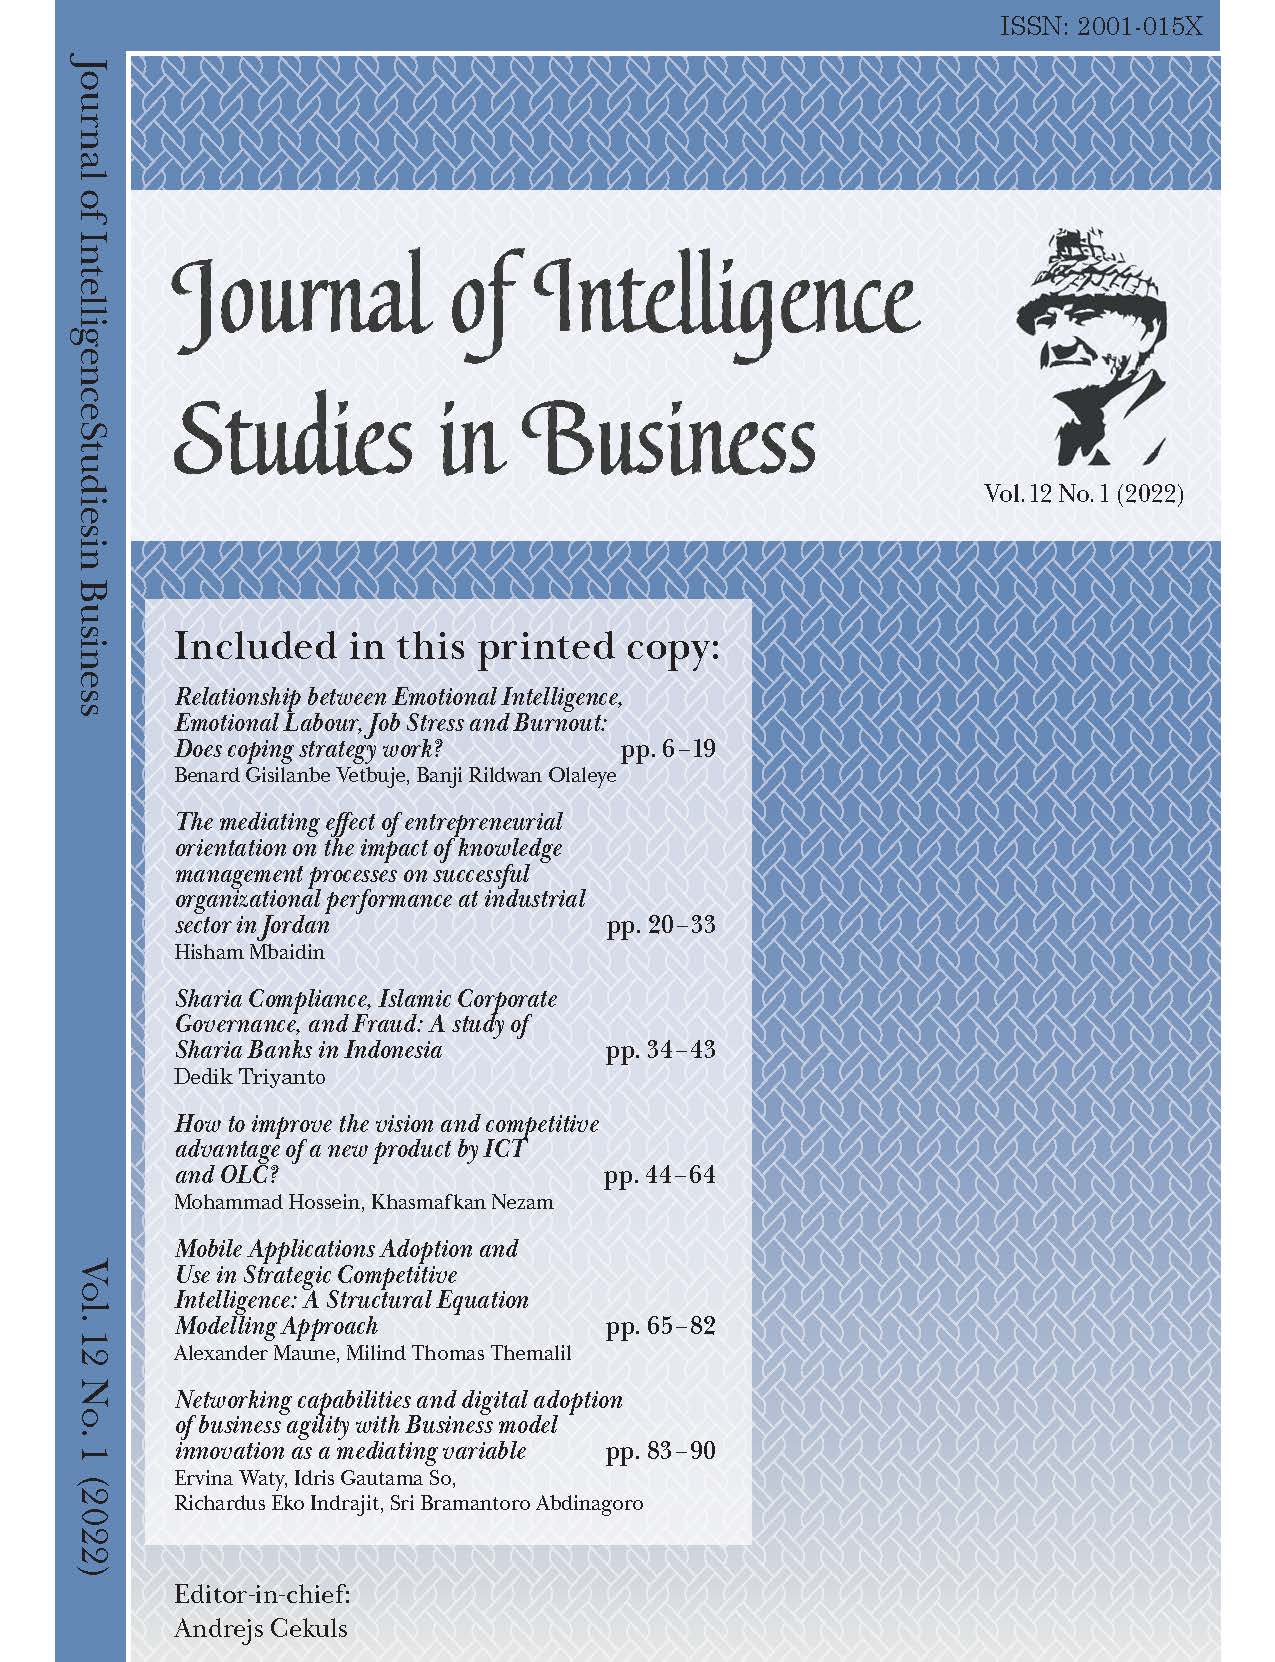 					View Vol. 12 No. 1 (2022): Journal of Intelligence Studies in Business
				